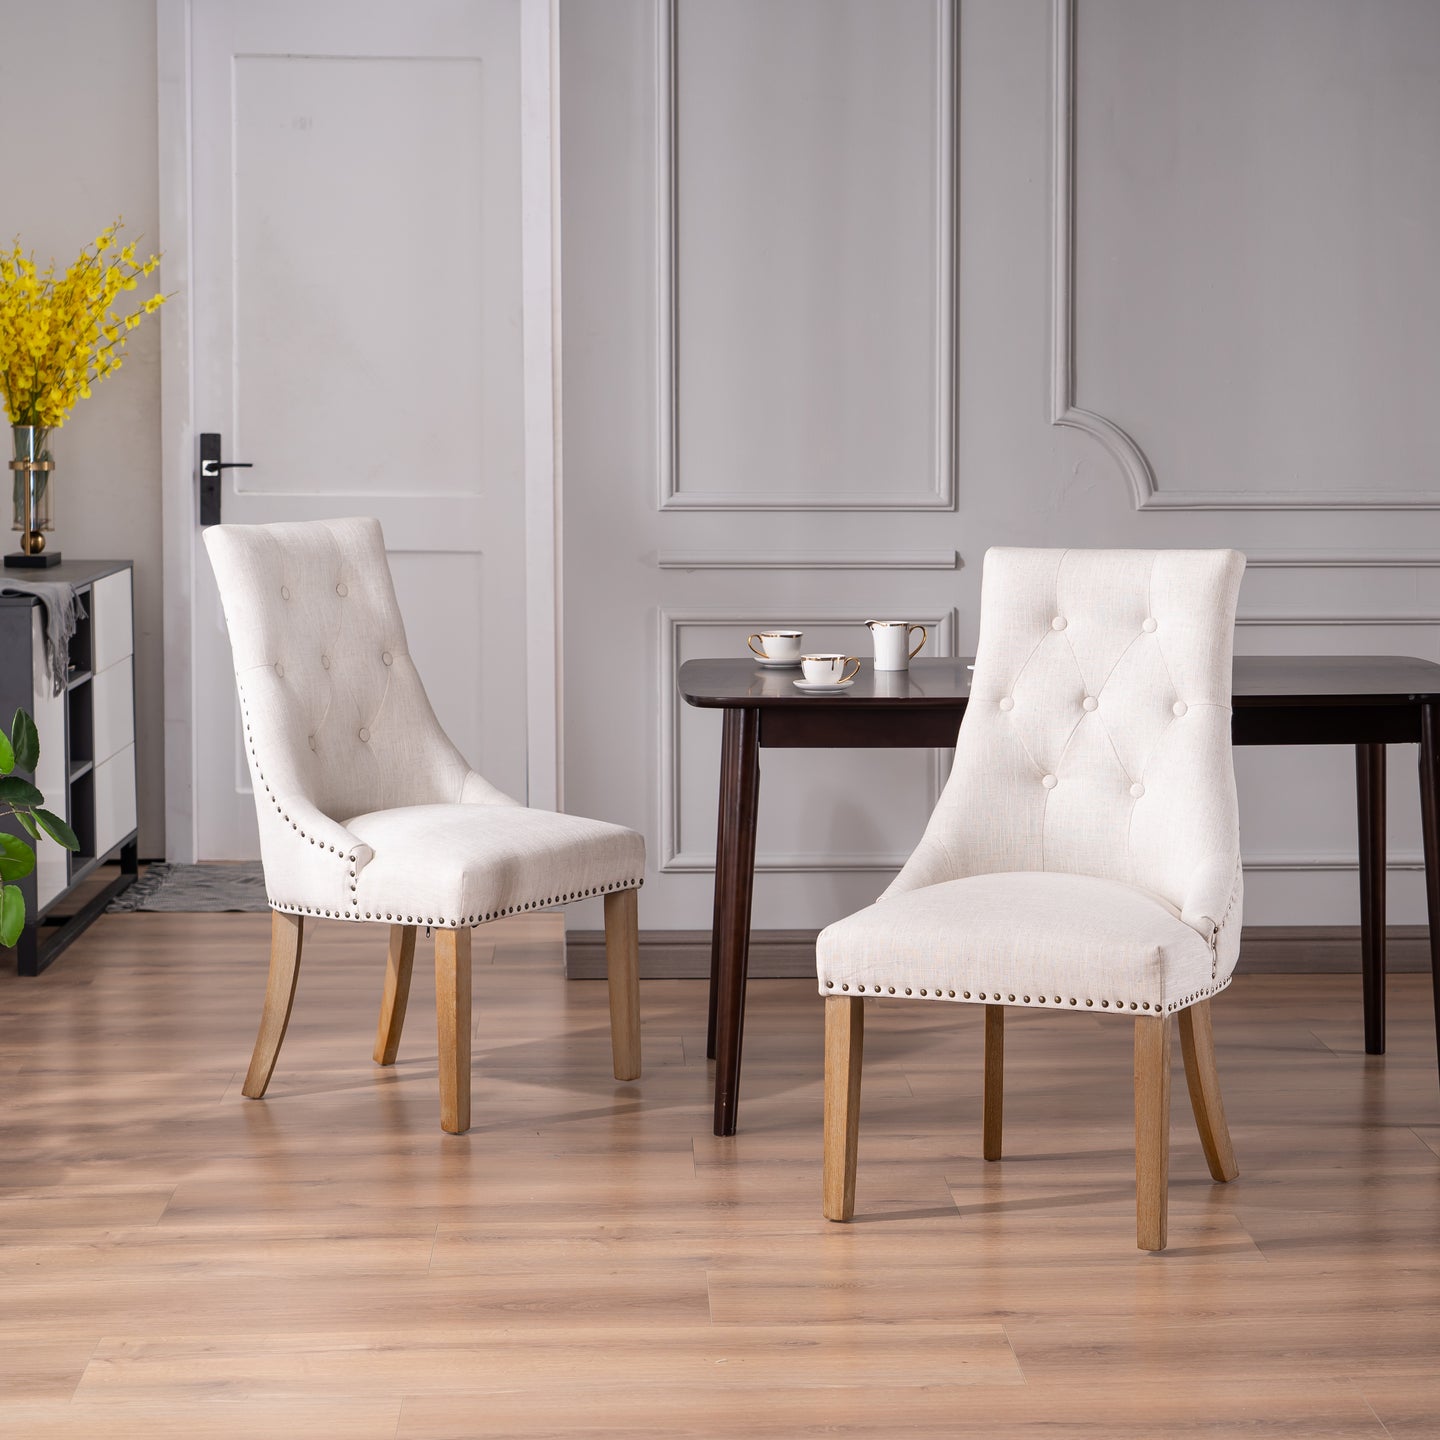 Mazone dining chair